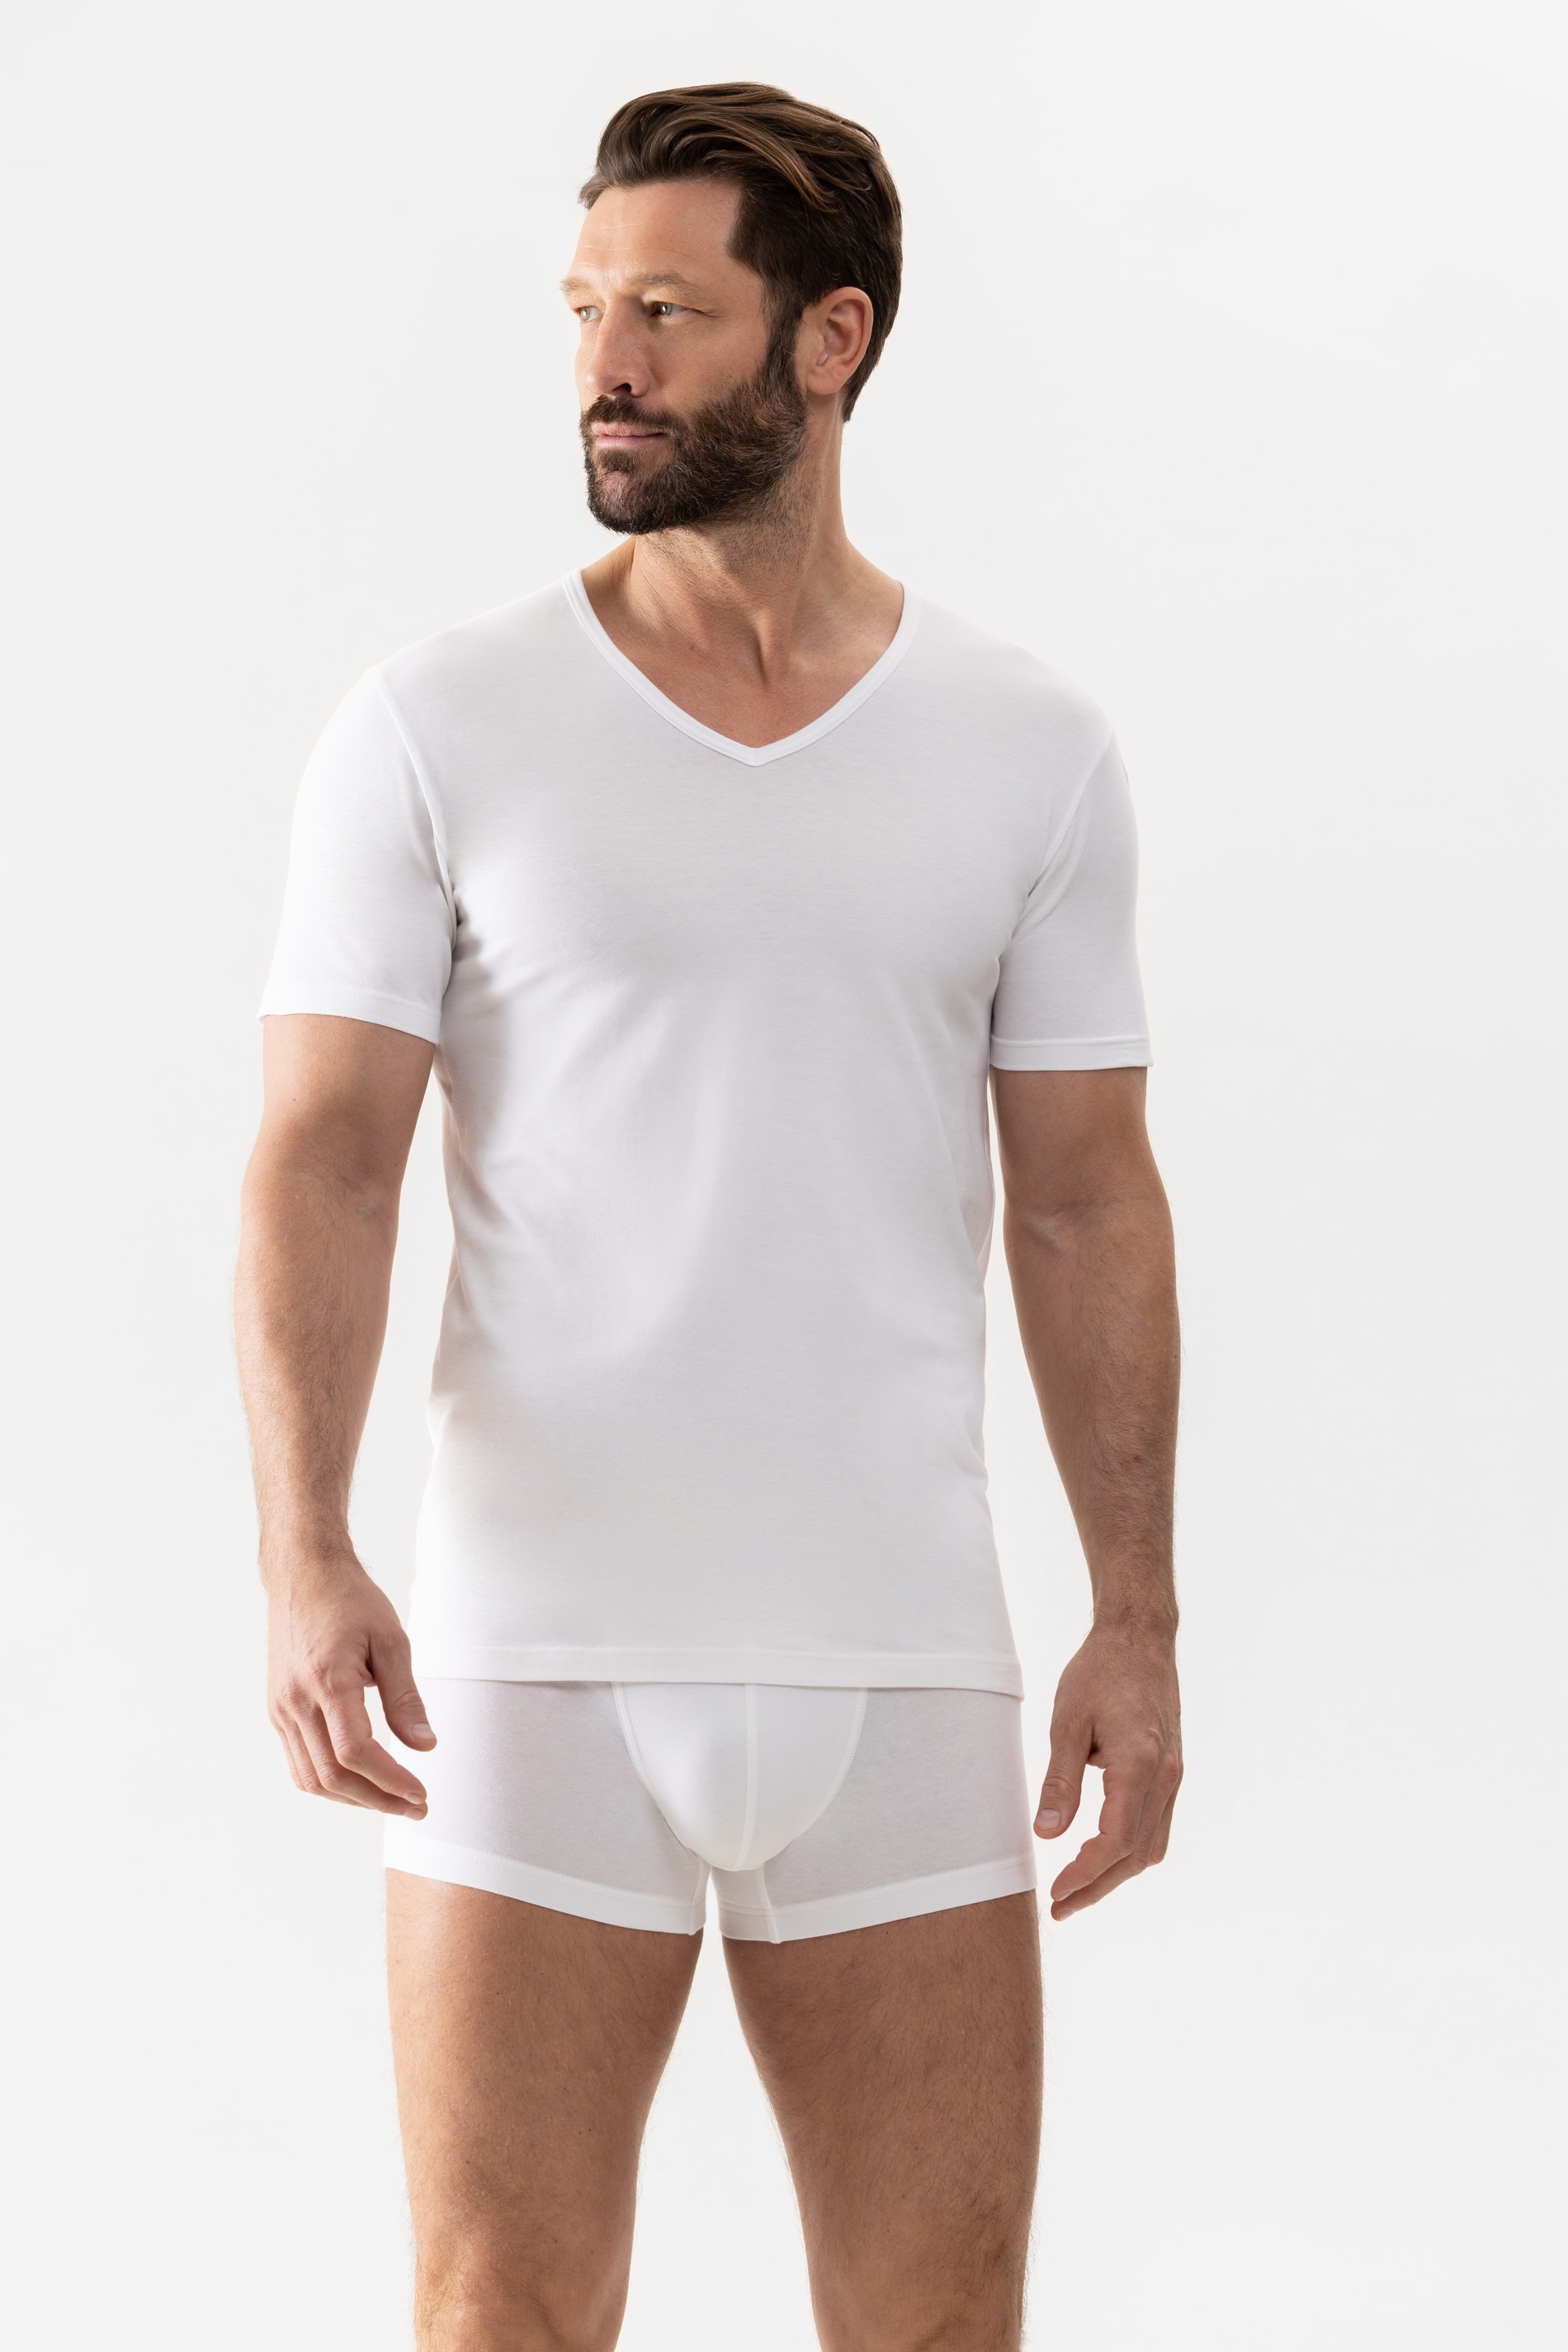 V-neck White RE:THINK Front View | mey®